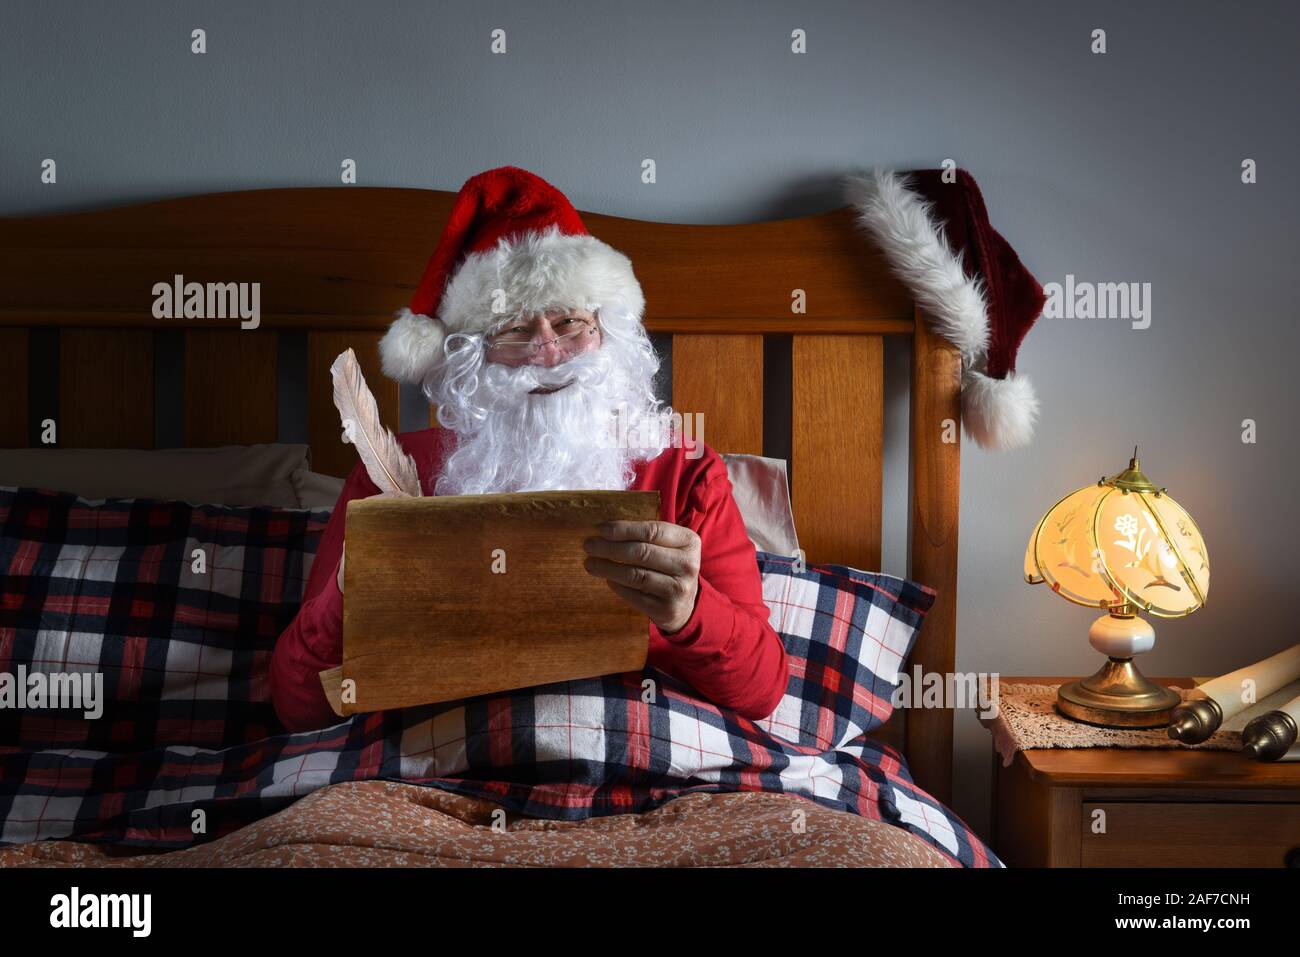 Santa Claus sitting up in his bed working on his naughty and nice list. Stock Photo